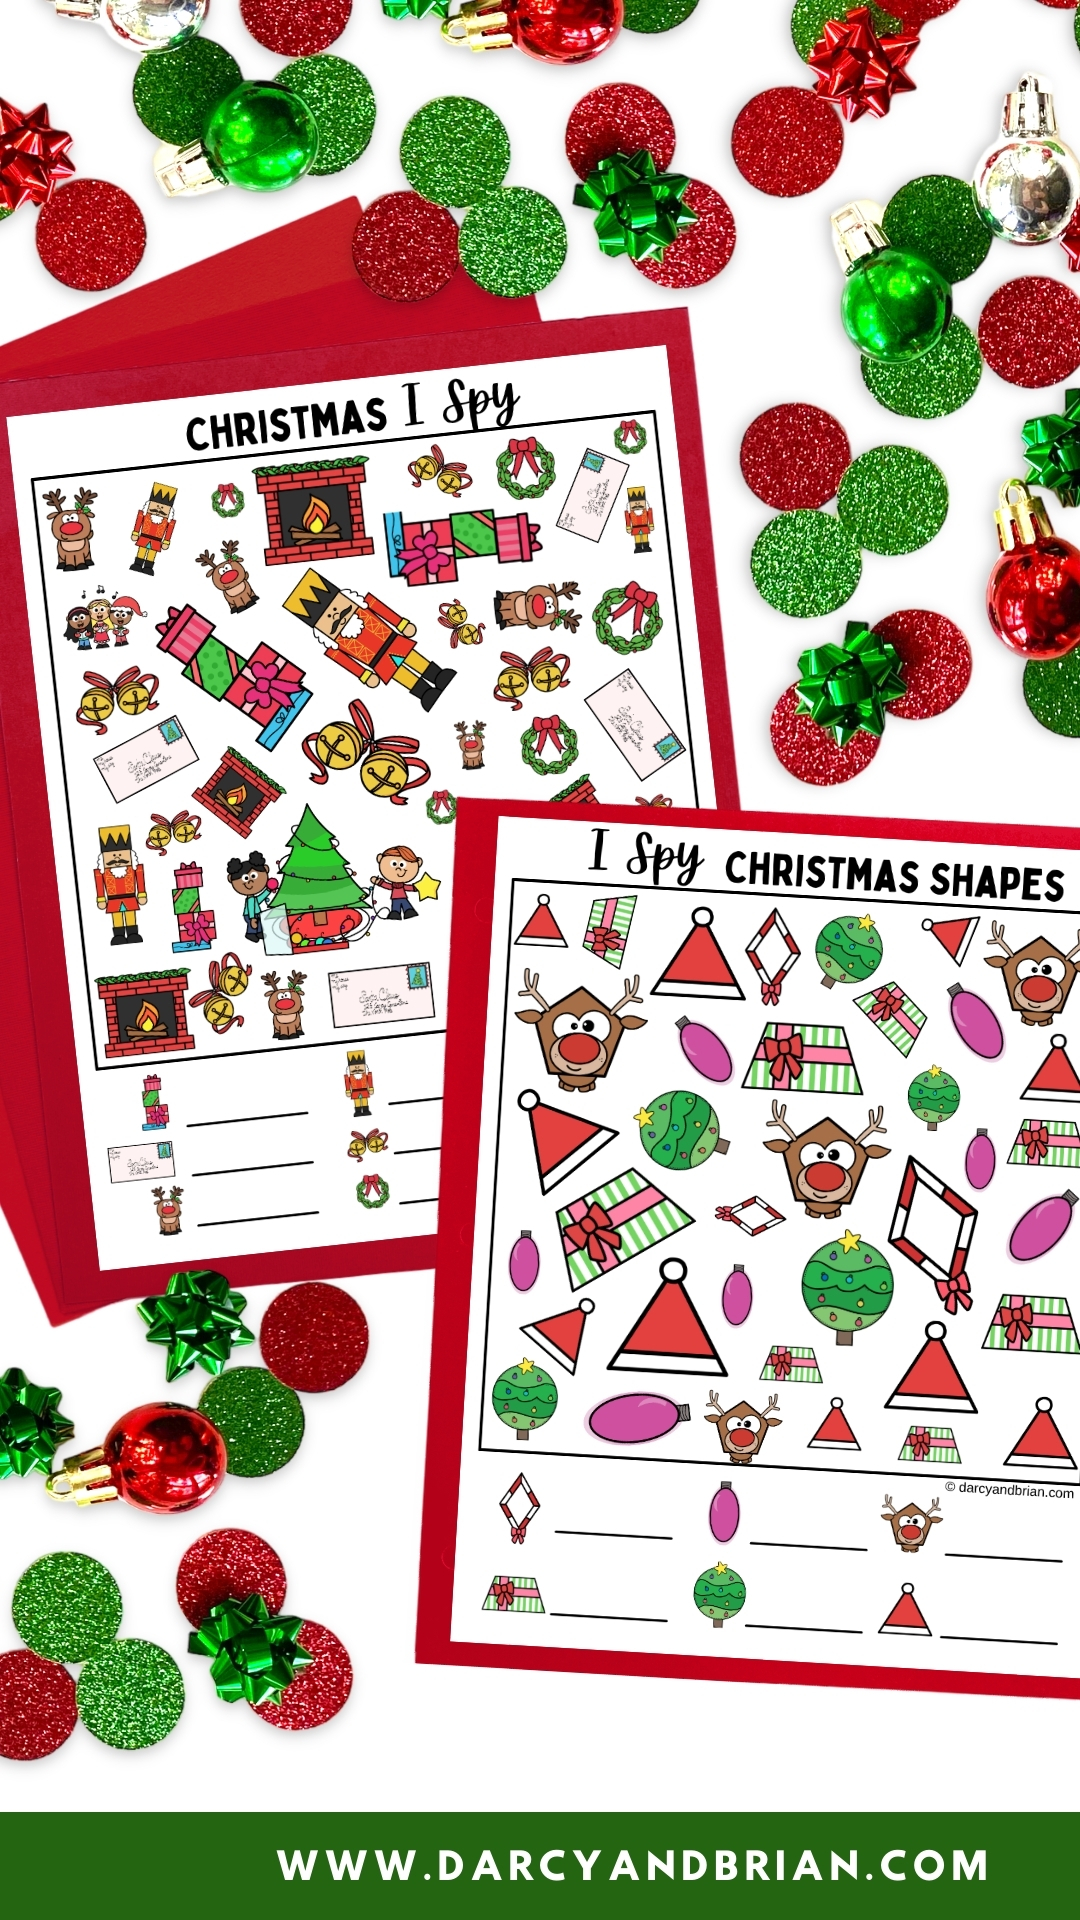 i spy Christmas book for kids Age 2-5 : A fun coloring Activity